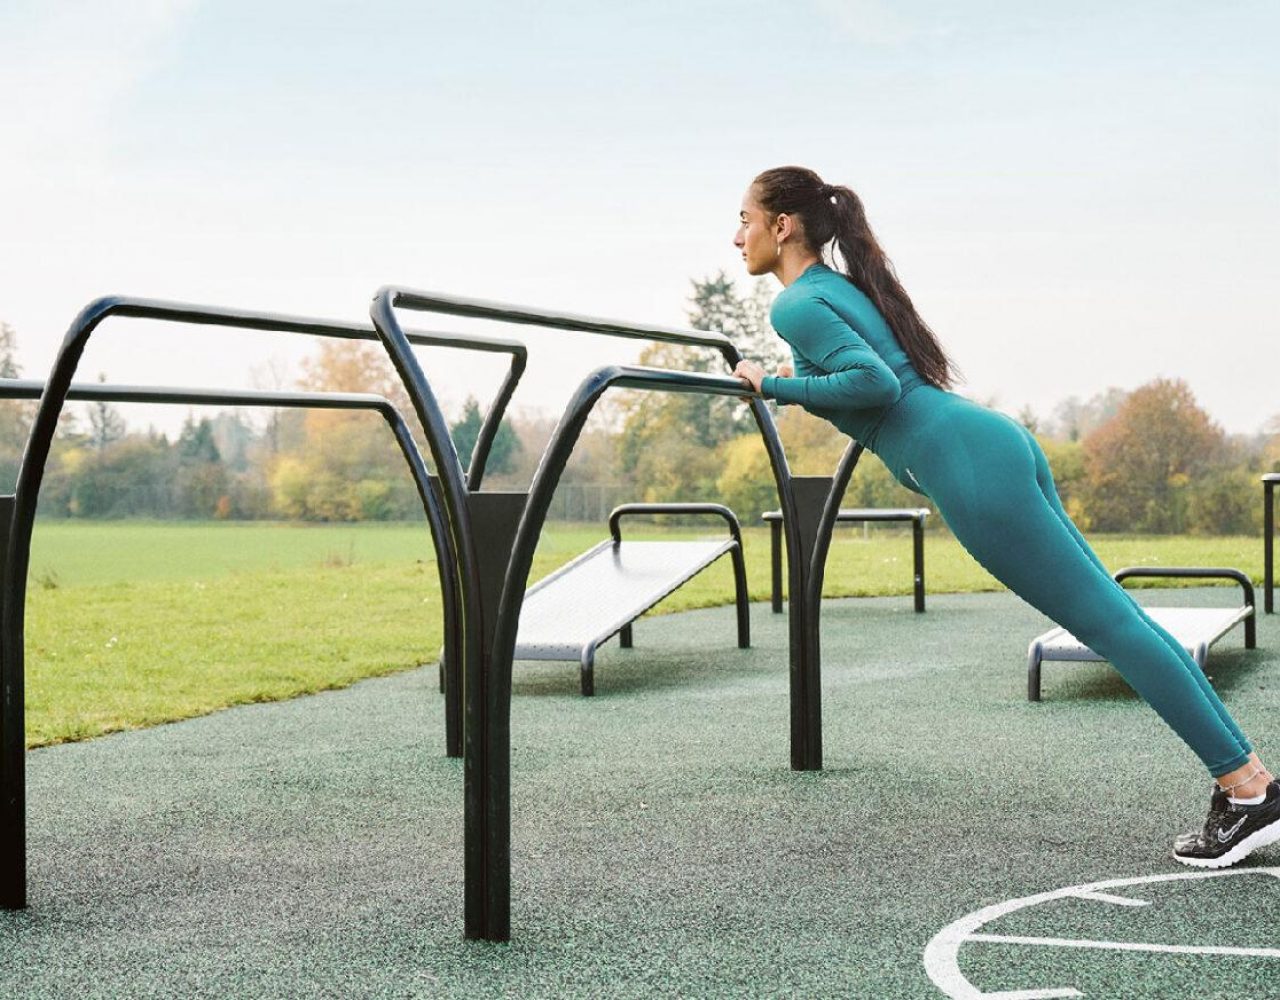 Outdoor fitness area with equipment suitable for anybody. Parallel Bar is usefull for calisthenics workouts.